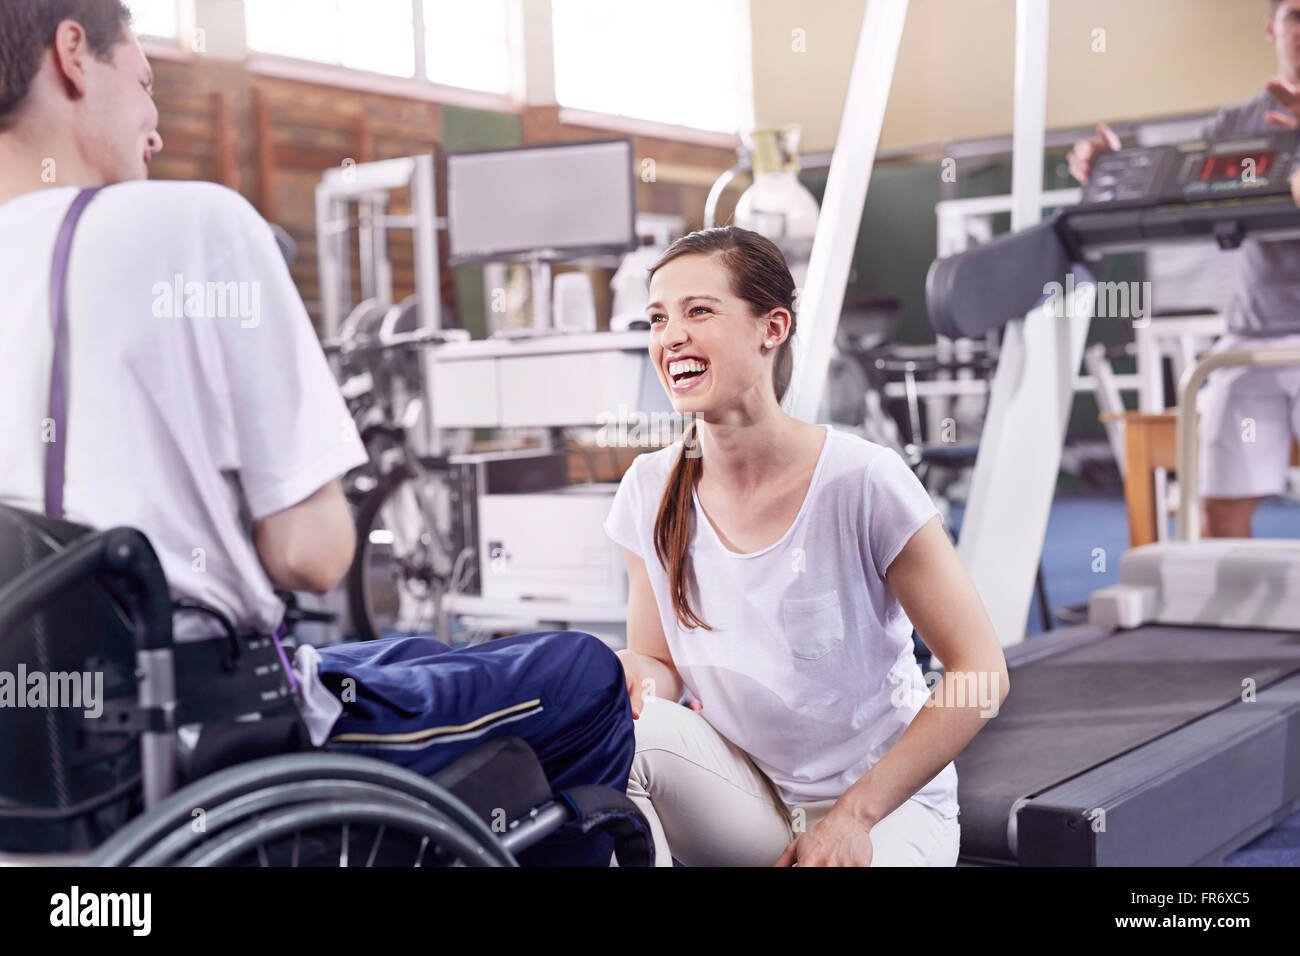 Smiling physical therapist talking to man in wheelchair Stock Photo